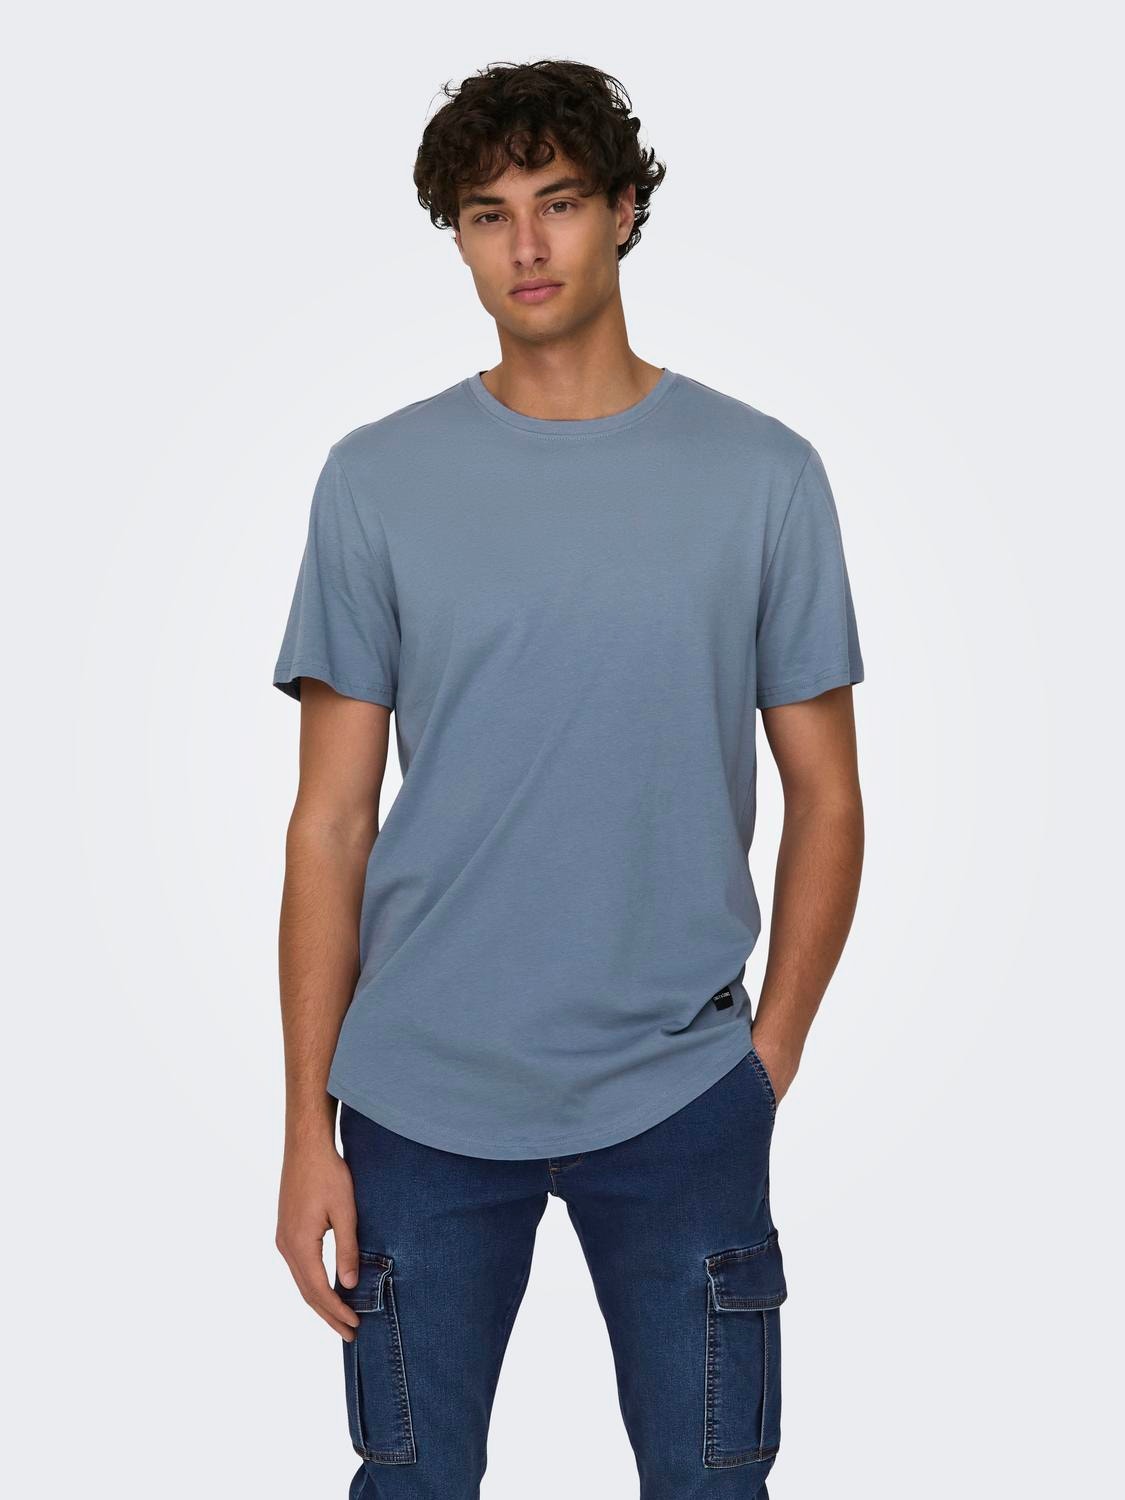 ONLY & SONS Long Line Fit Round Neck T-Shirt -Flint Stone - 22002973